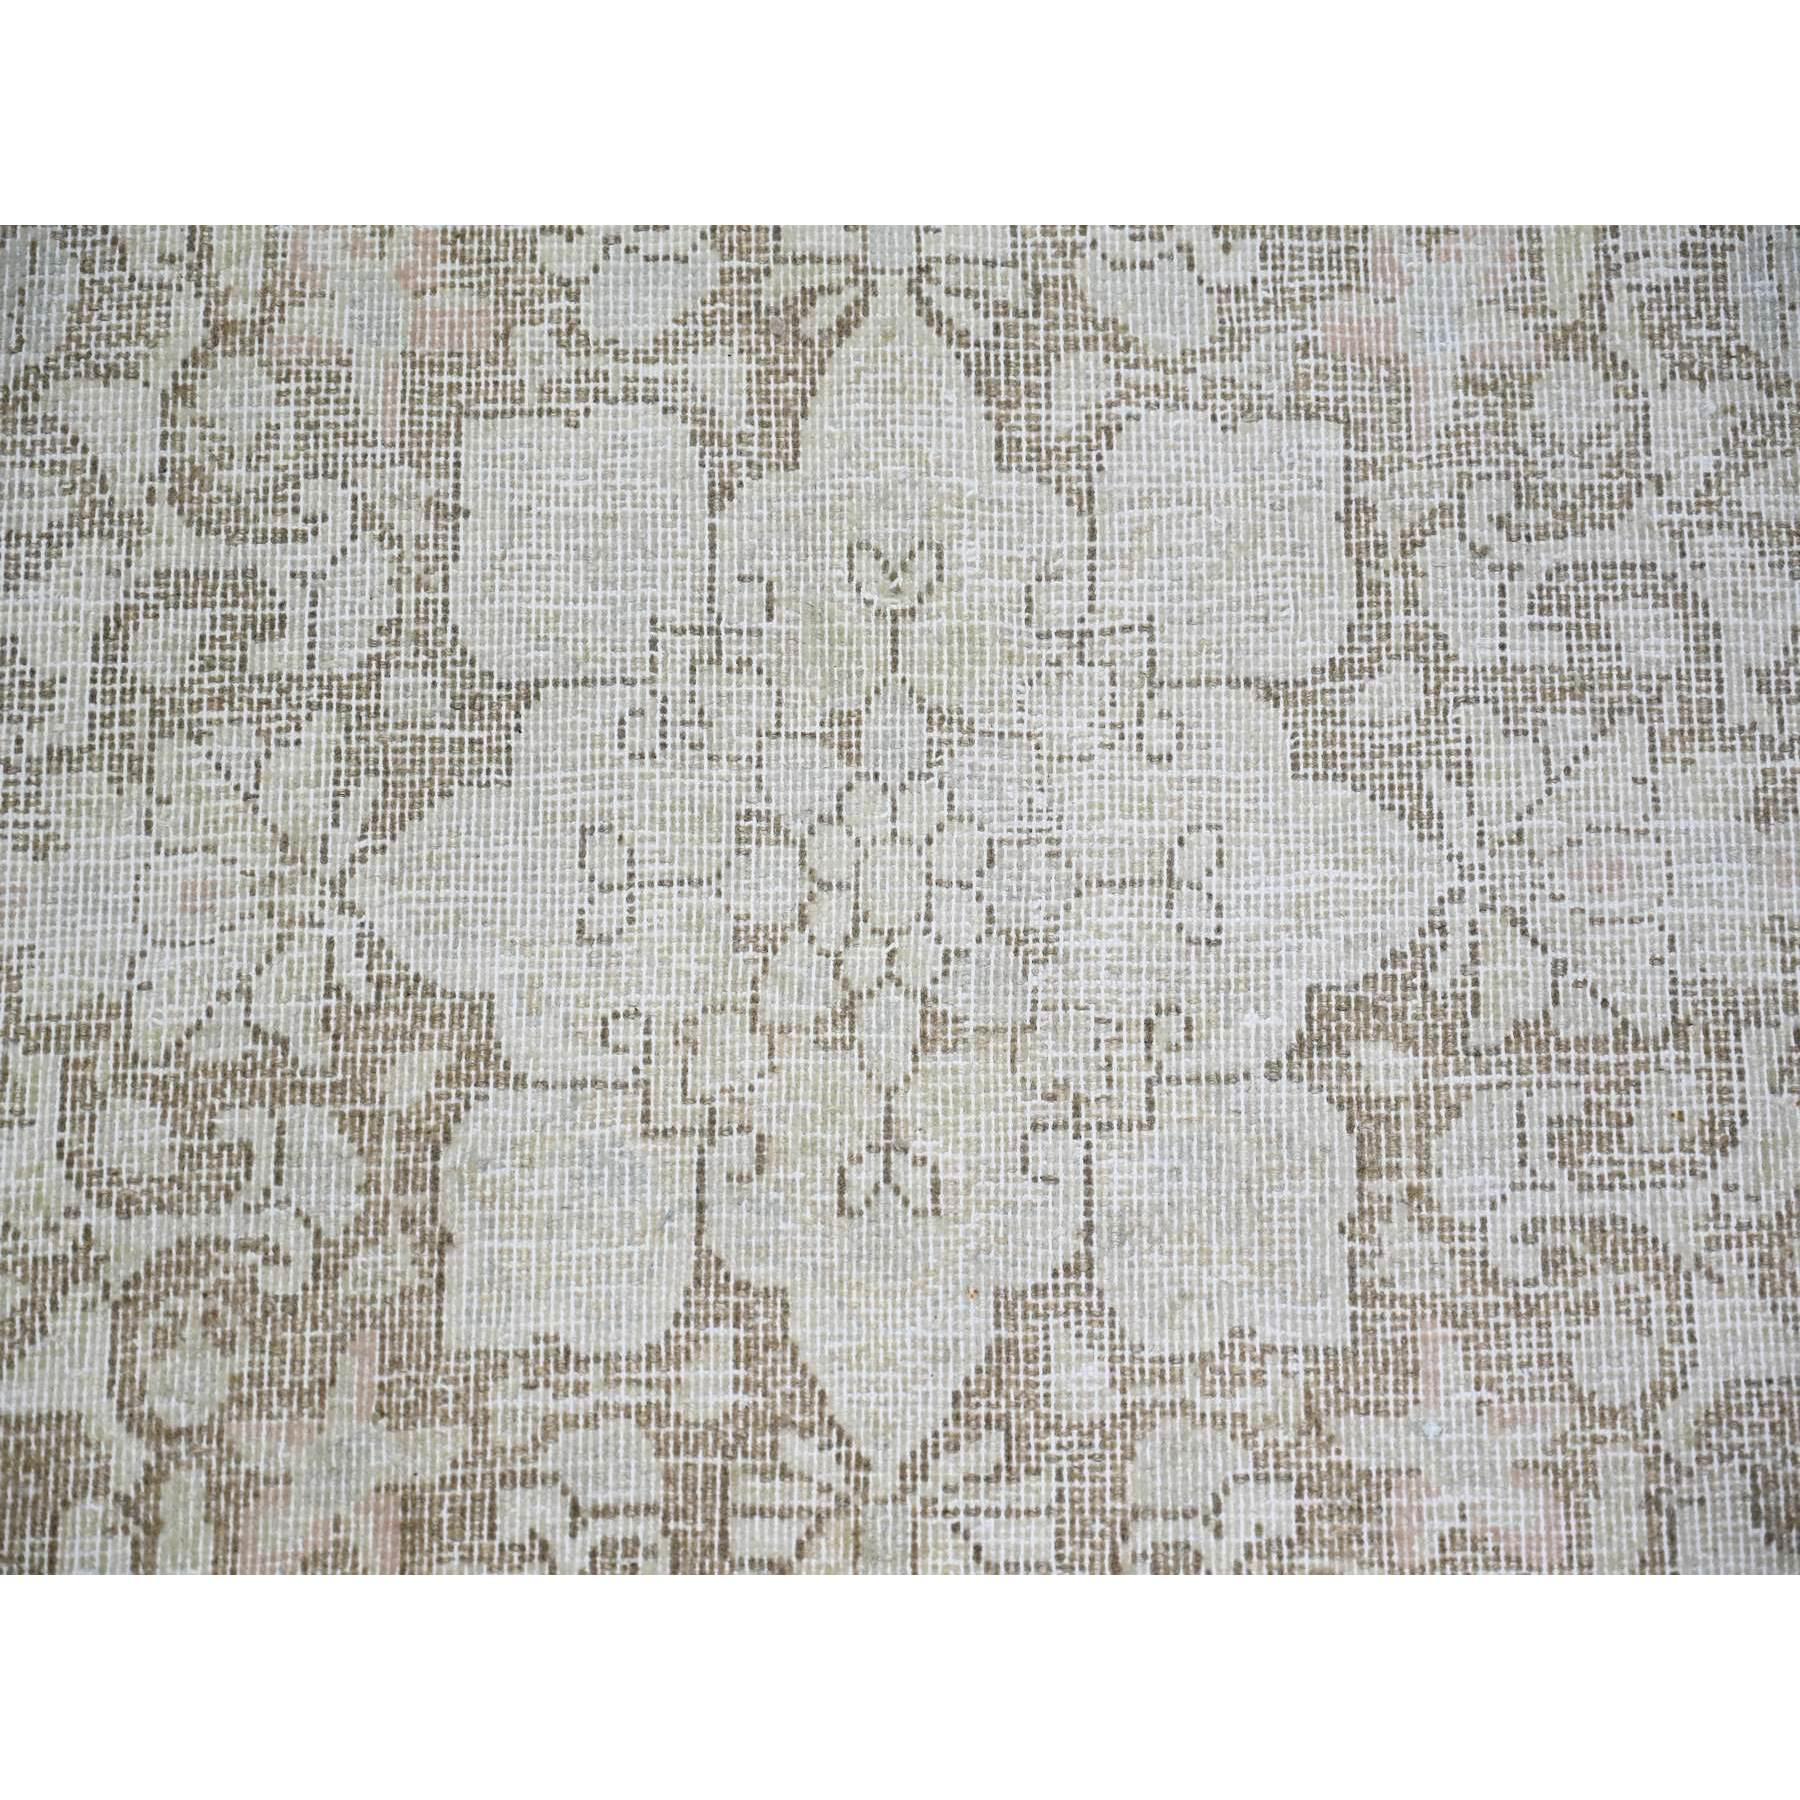 Monochromatic Wool Worn and Distressed Overdyed Vintage Kerman Hand Knotted Rug For Sale 2